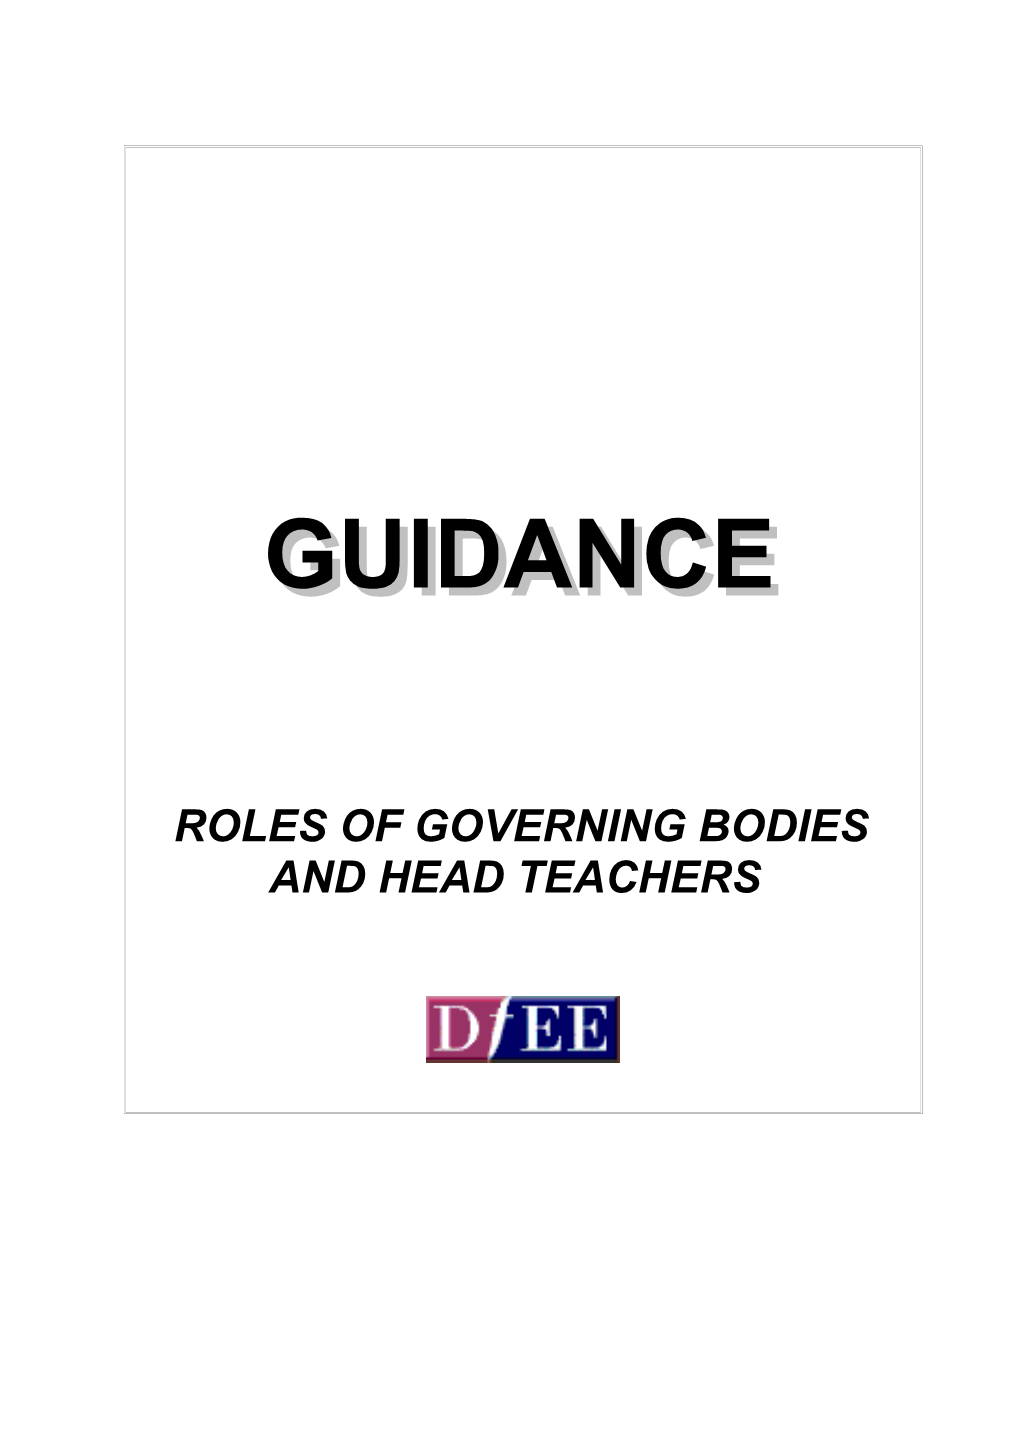 Guidance on the Education (School Government) Terms of Reference Regulations 2000